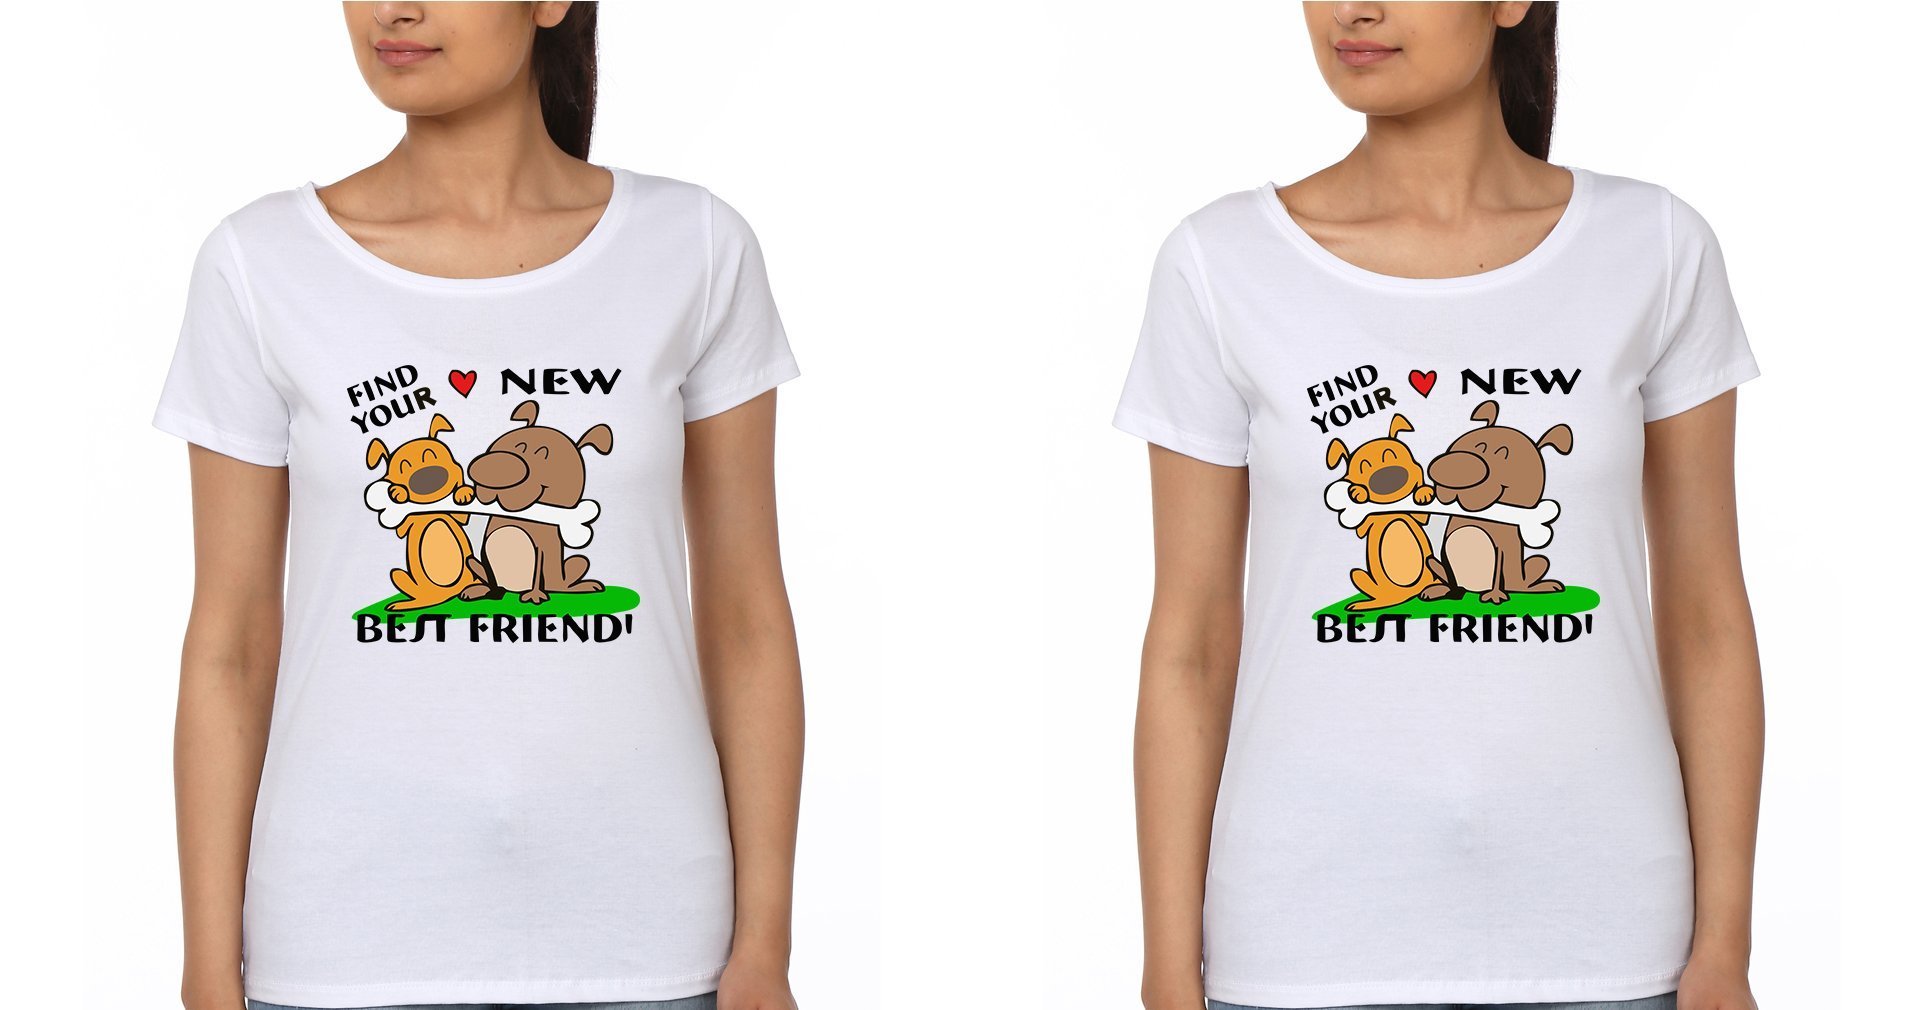 Find Your New Best friend BFF Half Sleeves T-Shirts-FunkyTradition - FunkyTradition